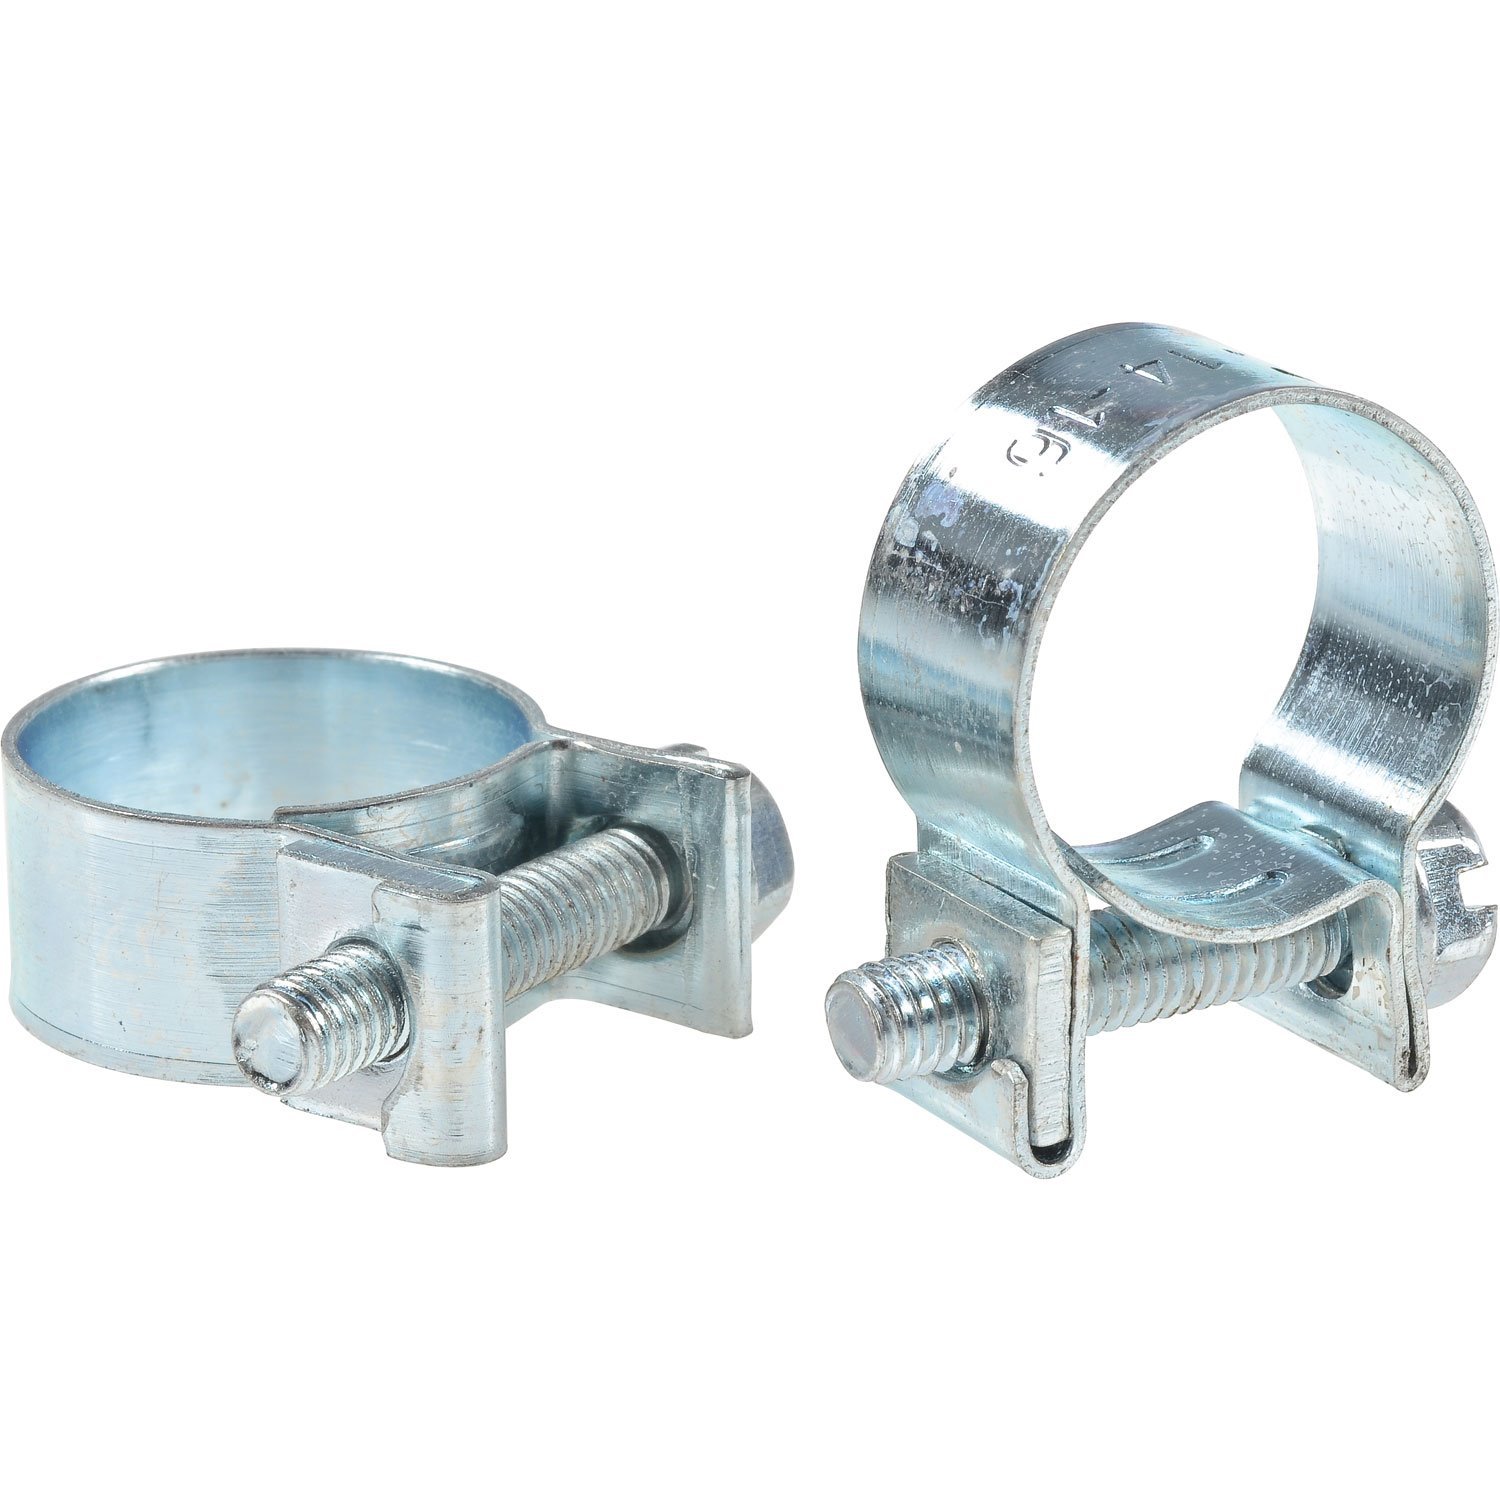 JEGS 16047: Fuel Injection Hose Clamps Fits 3/8 I.D. Hose - JEGS